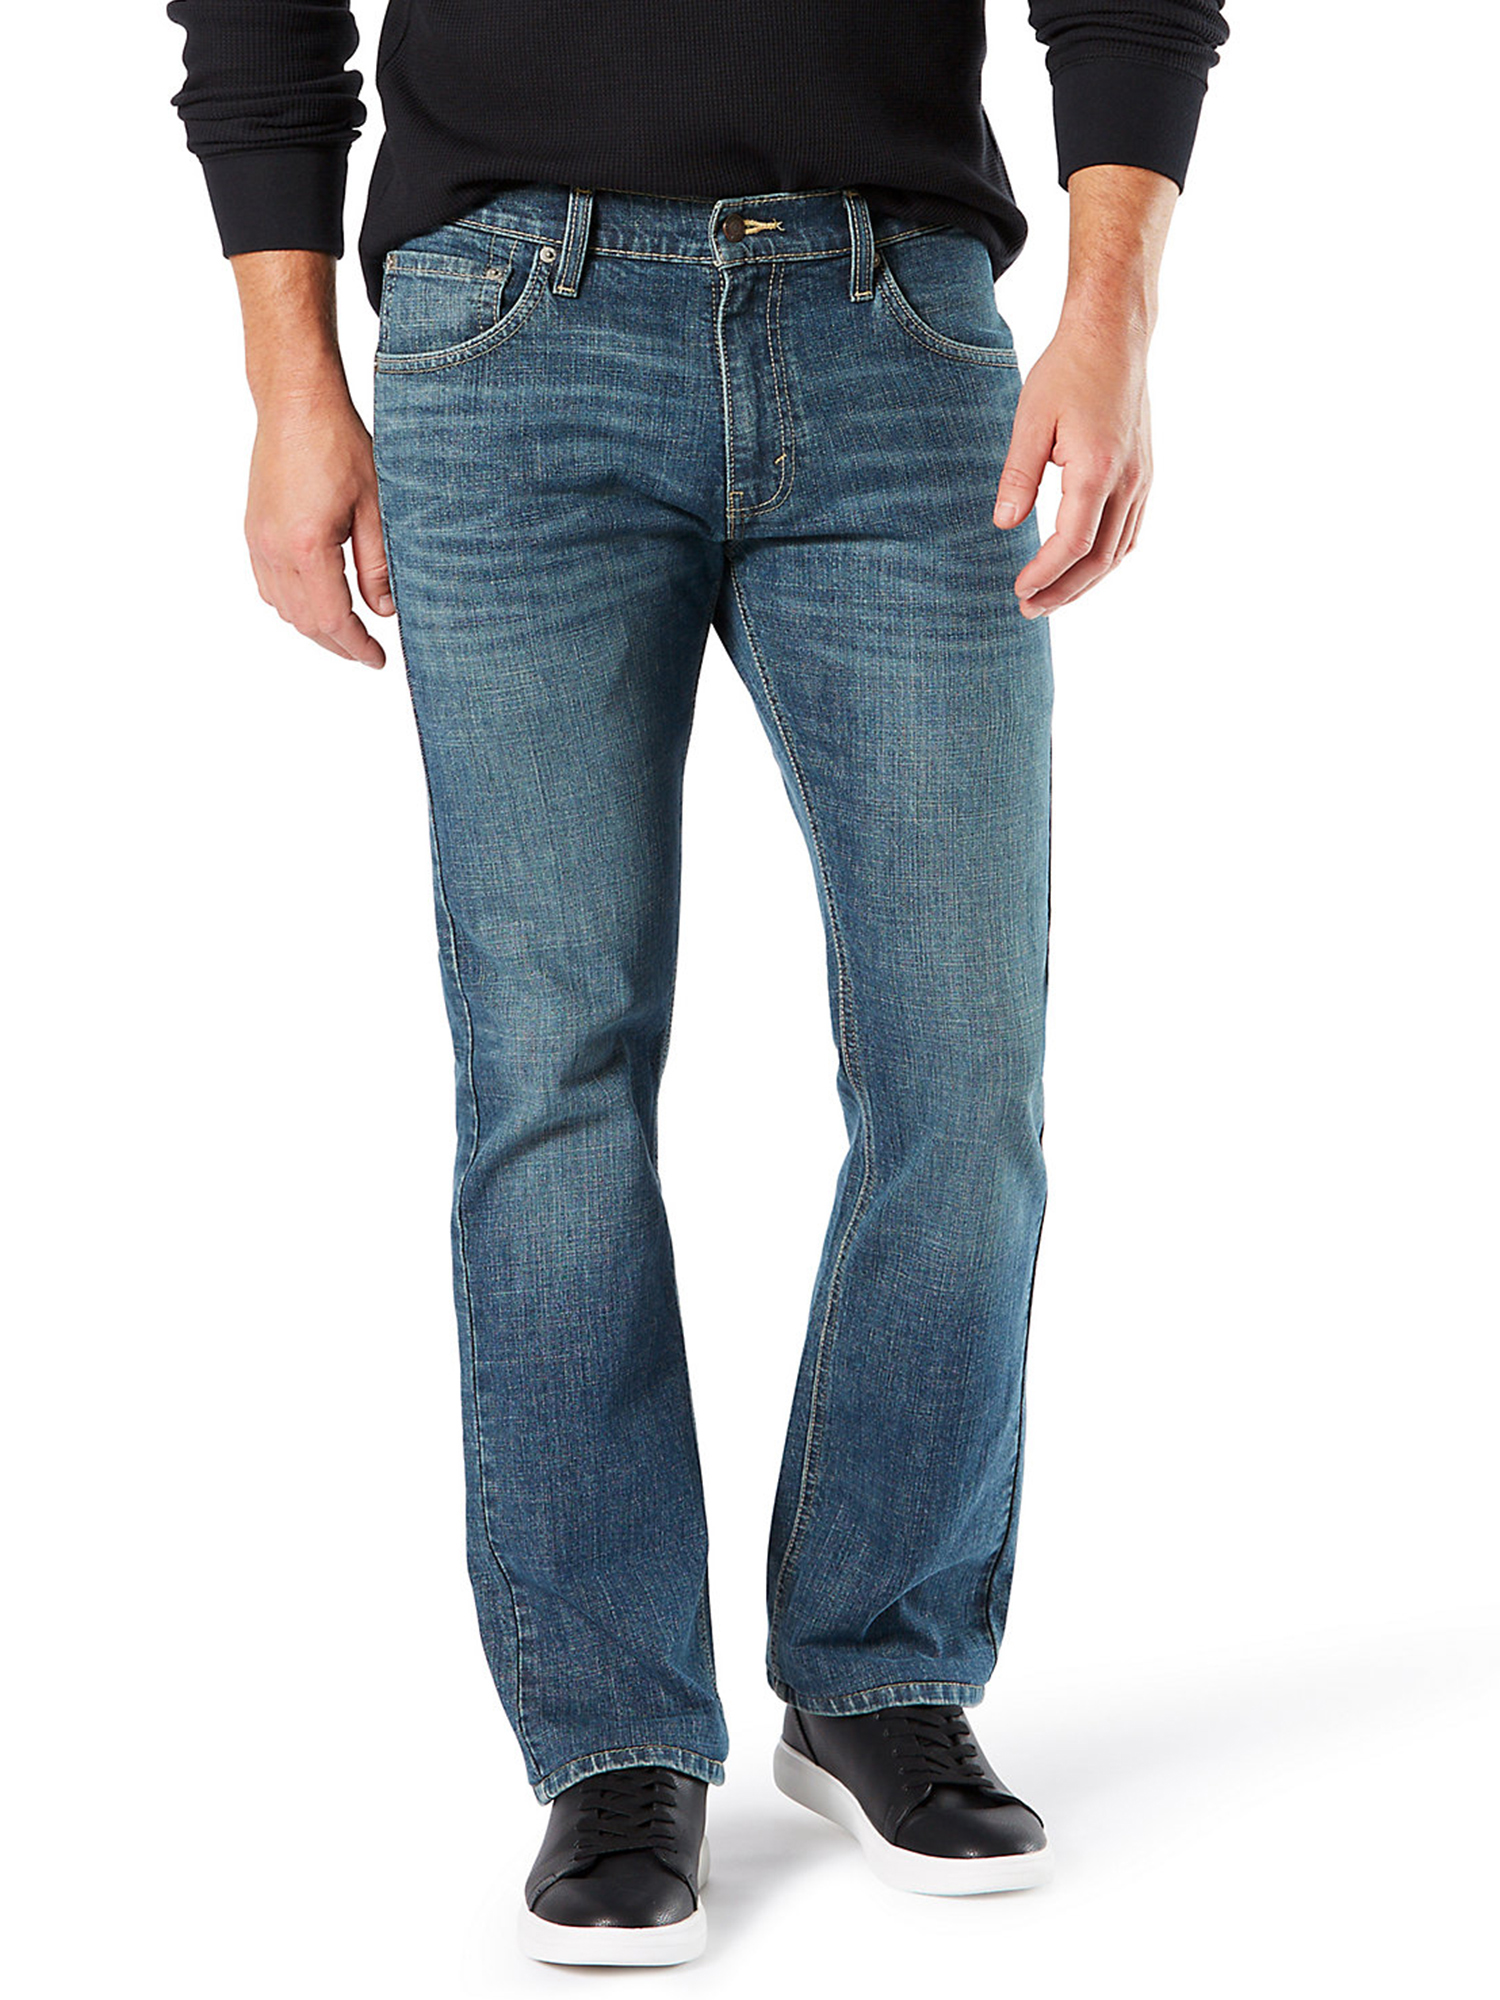 Signature by Levi Strauss & Co. Men's and Big and Tall Bootcut Jeans - image 1 of 9